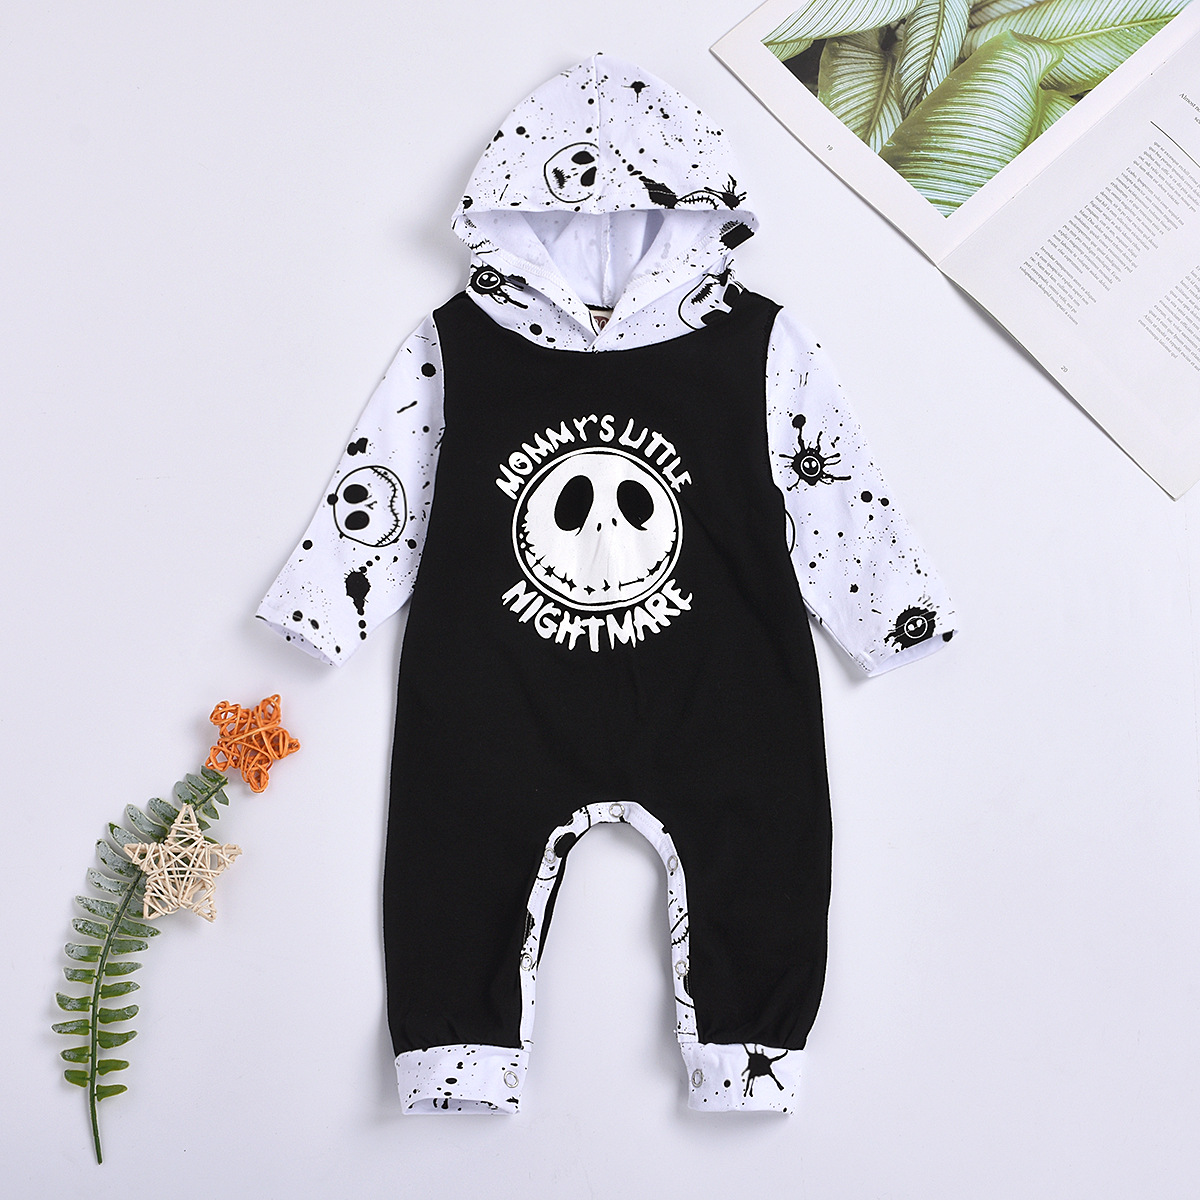 Children's Clothing European And American Style New Boy Halloween Cute And Cool Skull One-piece Stitching Romper